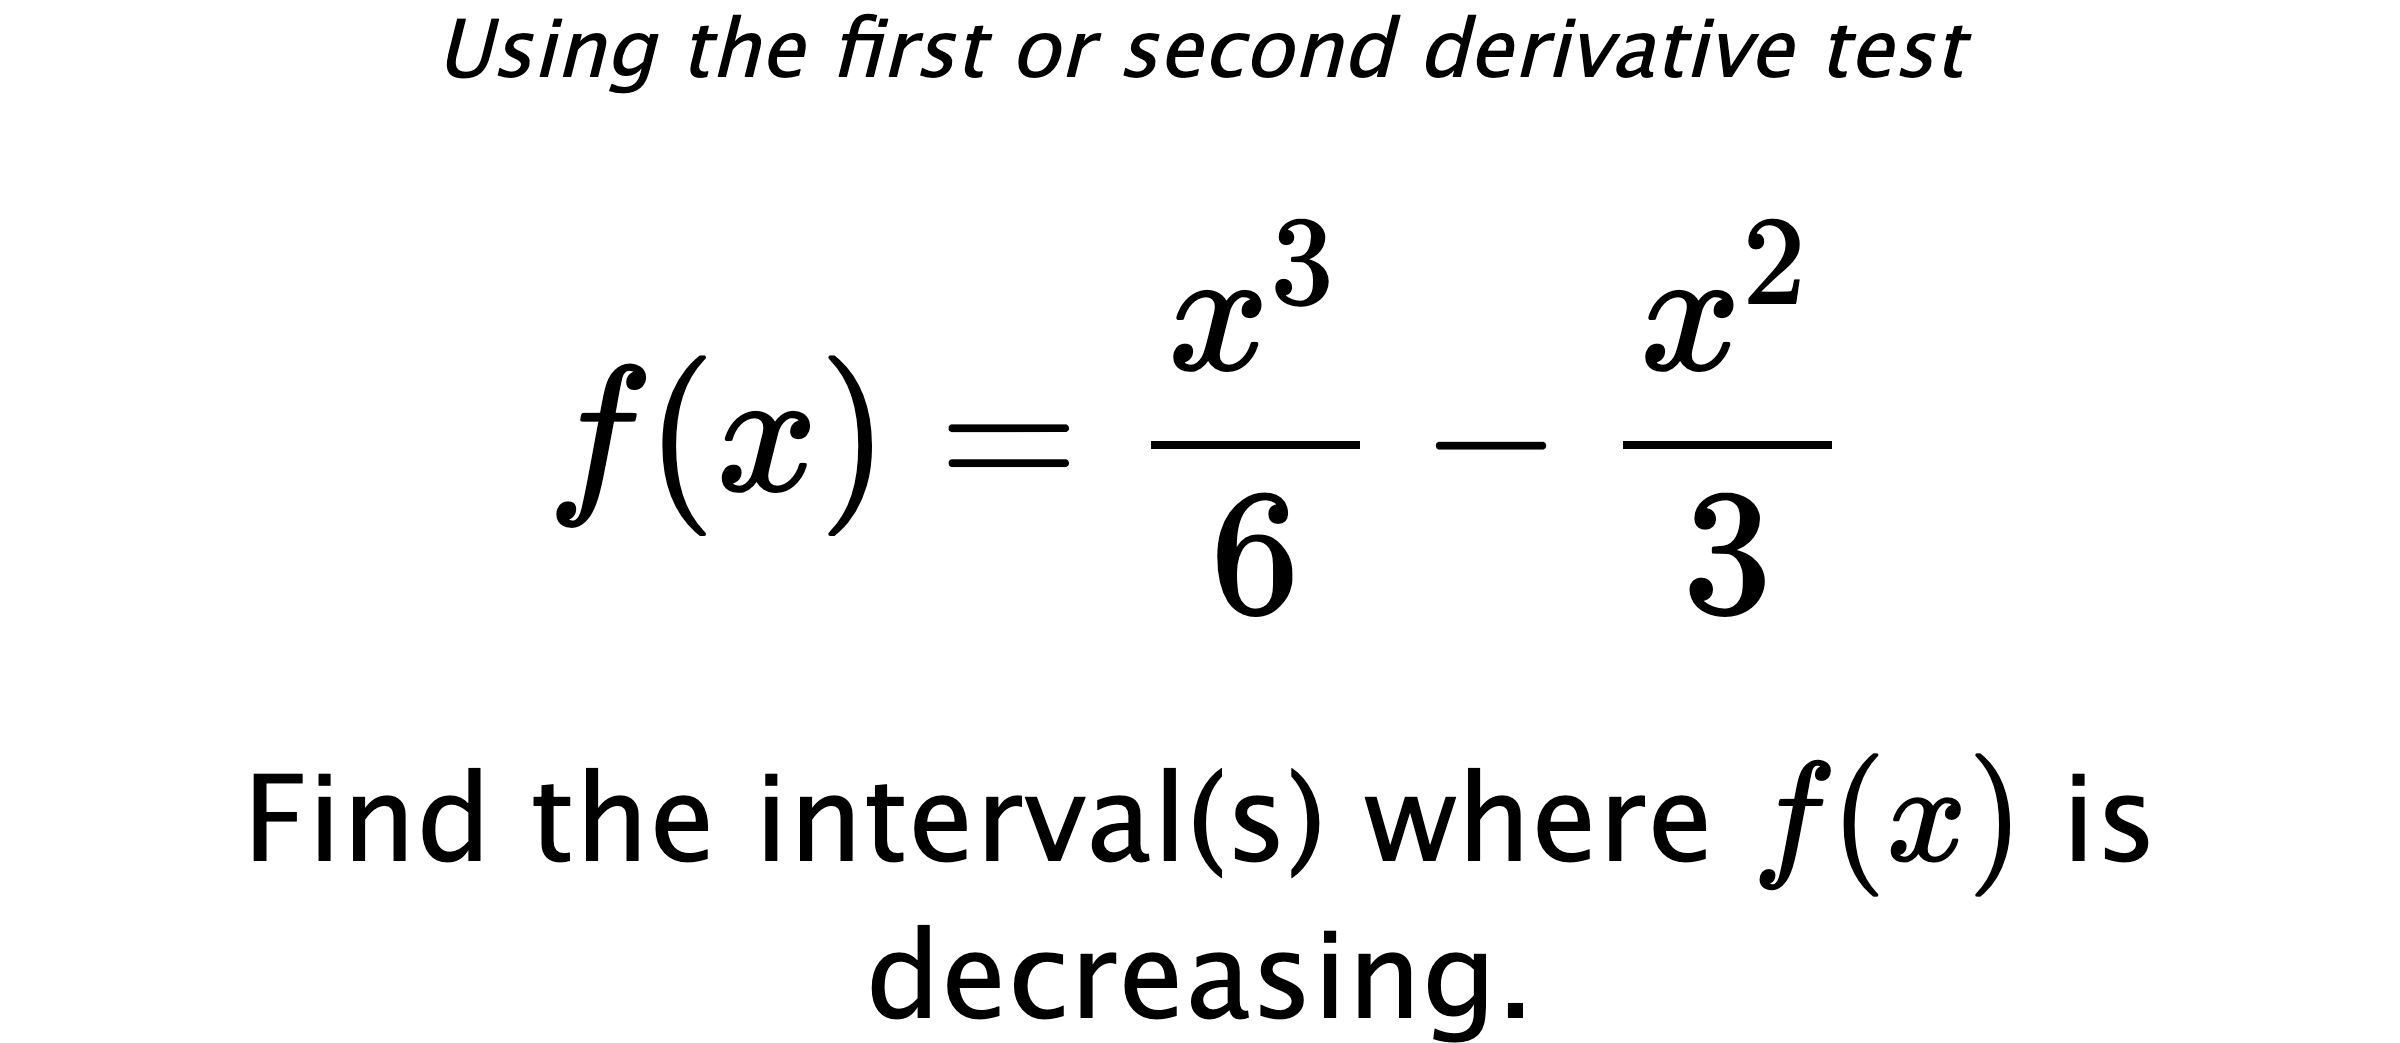 Using the first or second derivative test $$ f(x)=\frac{x^3}{6}-\frac{x^2}{3} $$ Find the interval(s) where $ f(x) $ is decreasing.